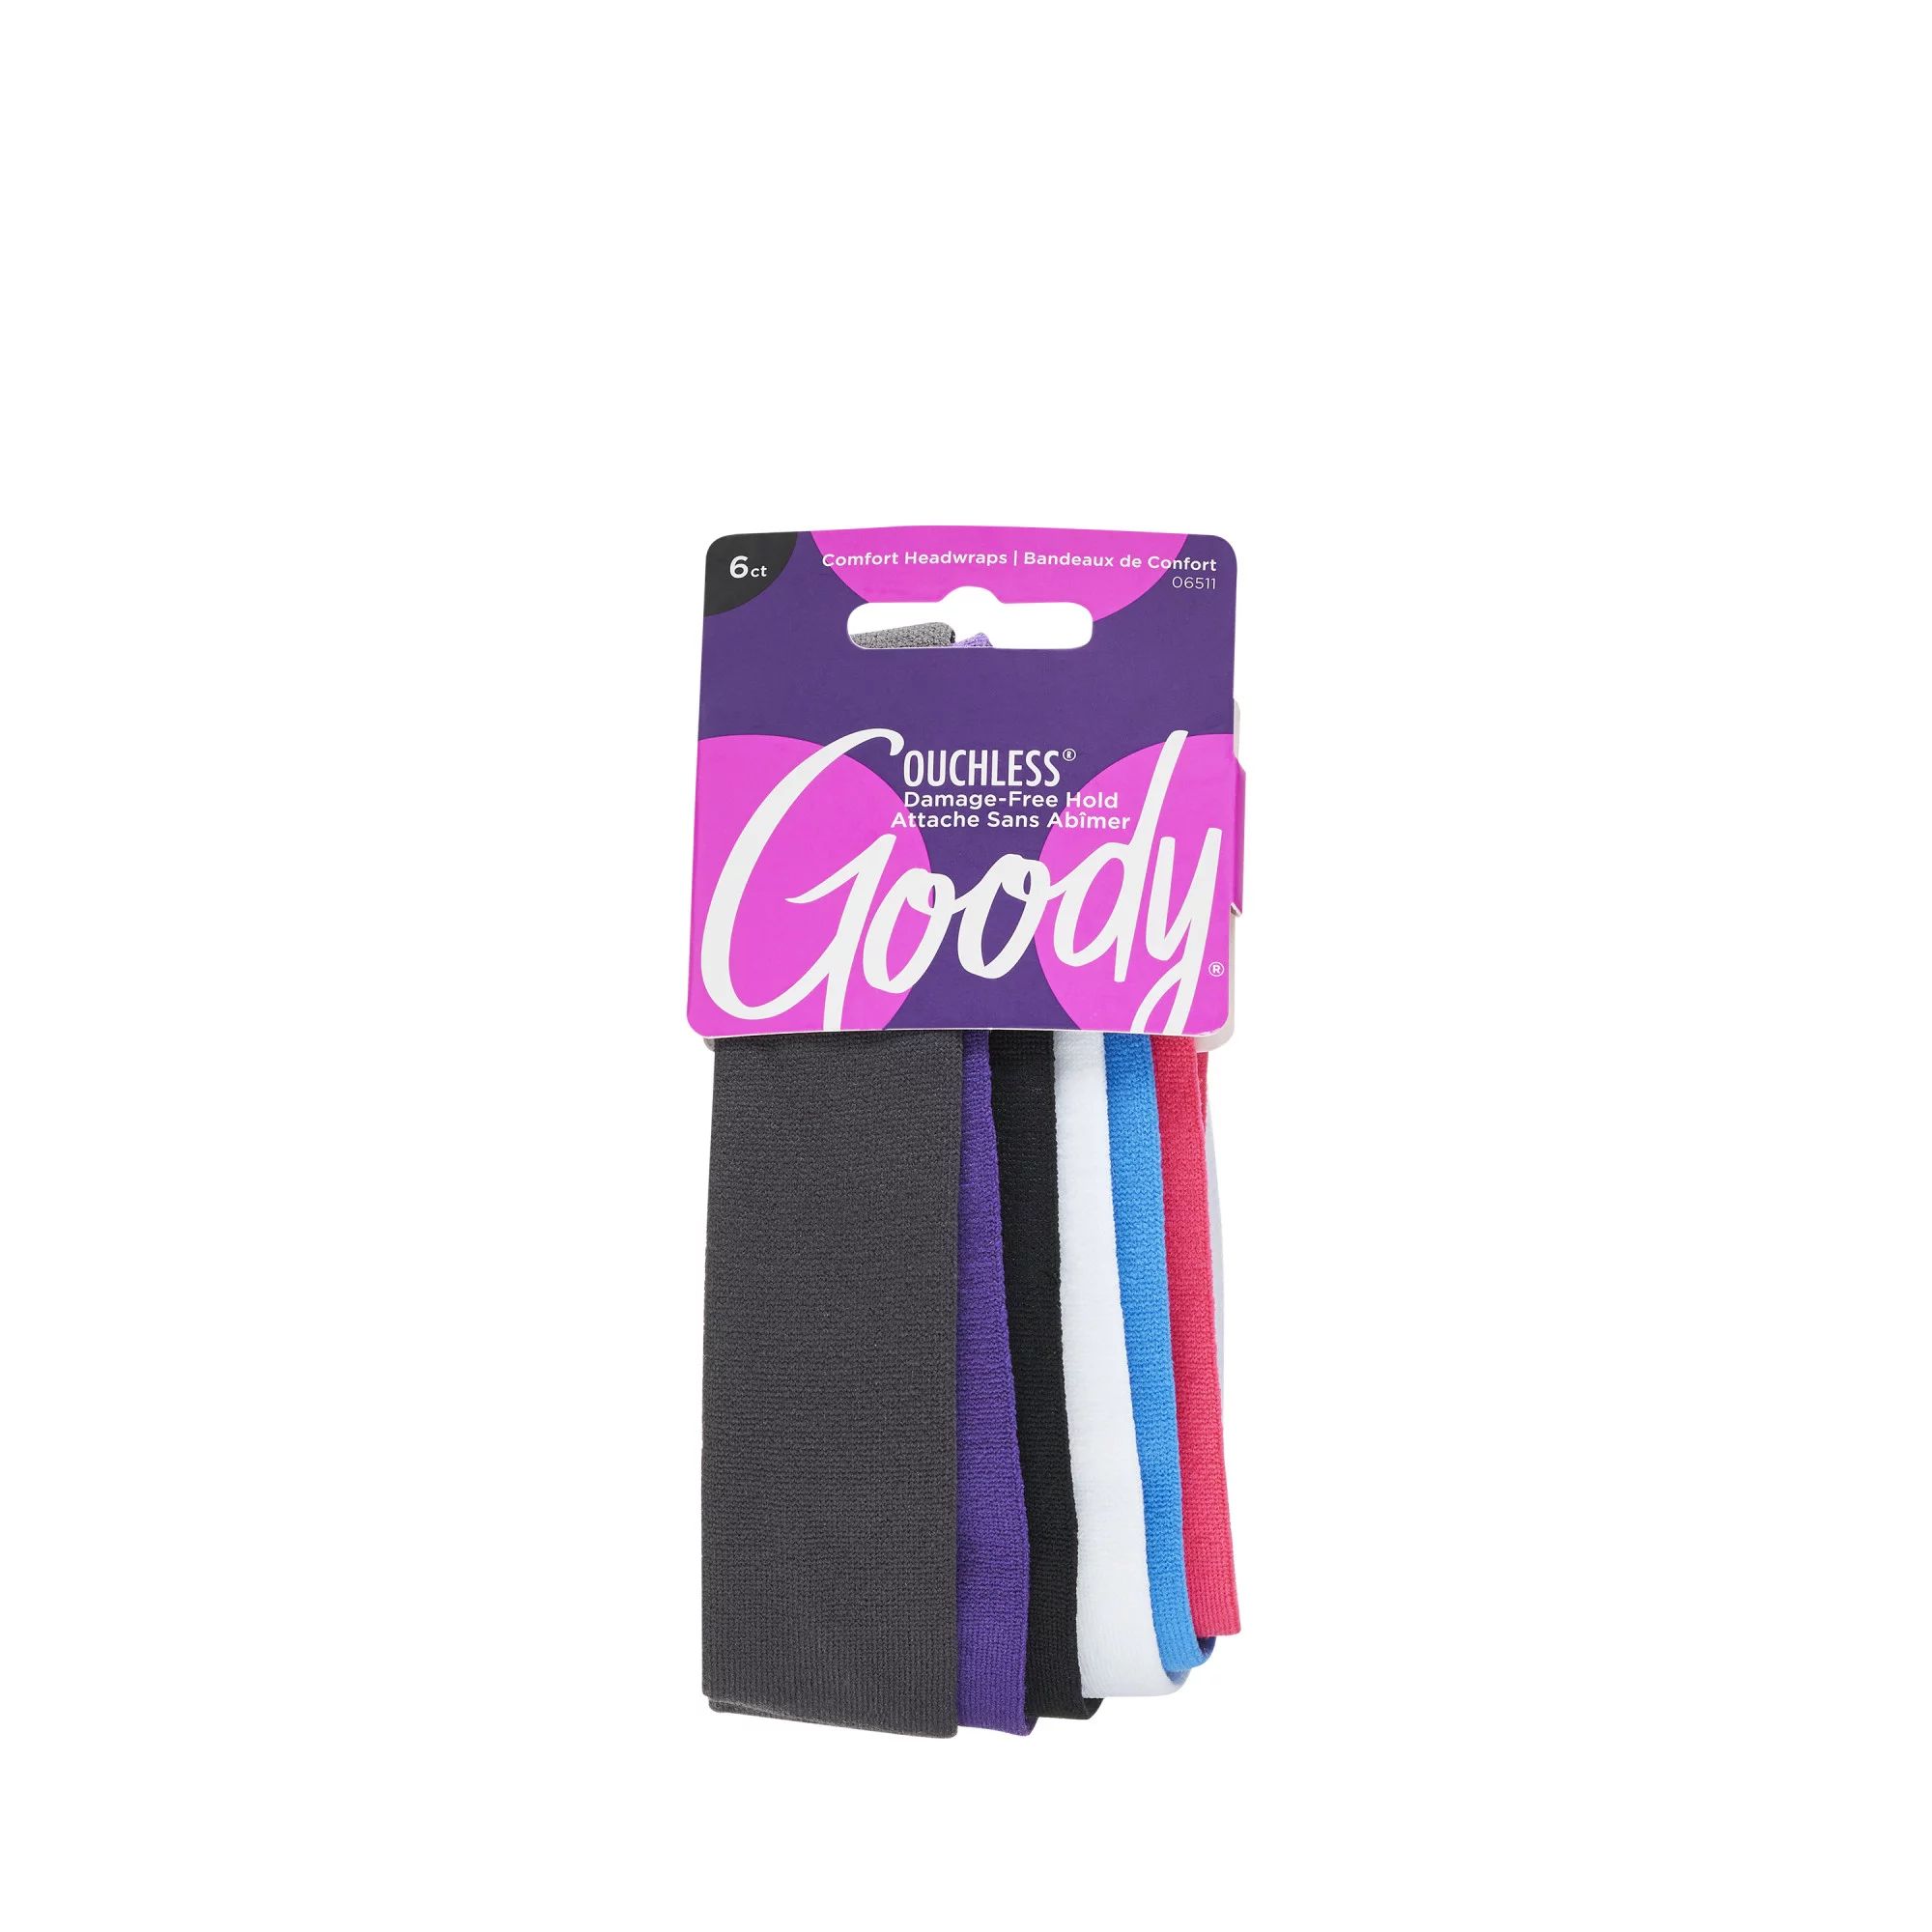 Goody Ouchless® Jersey Fabric Headwraps, Wide Cloth Headbands, 6 Ct | Walmart (US)